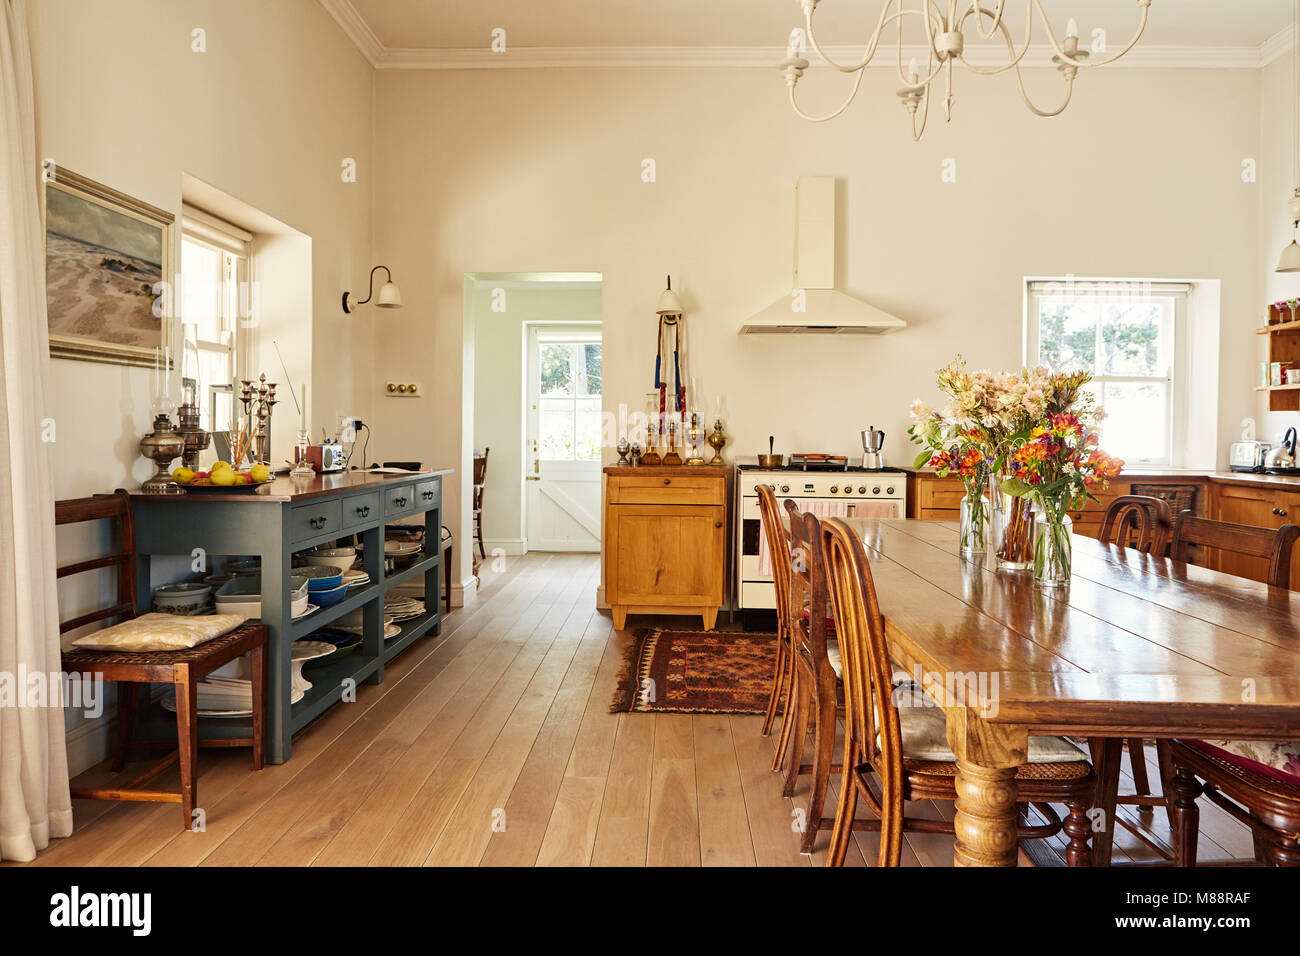 Interior of a large country style kitchen in a residental home with a wooden dining table and appliances Stock Photo